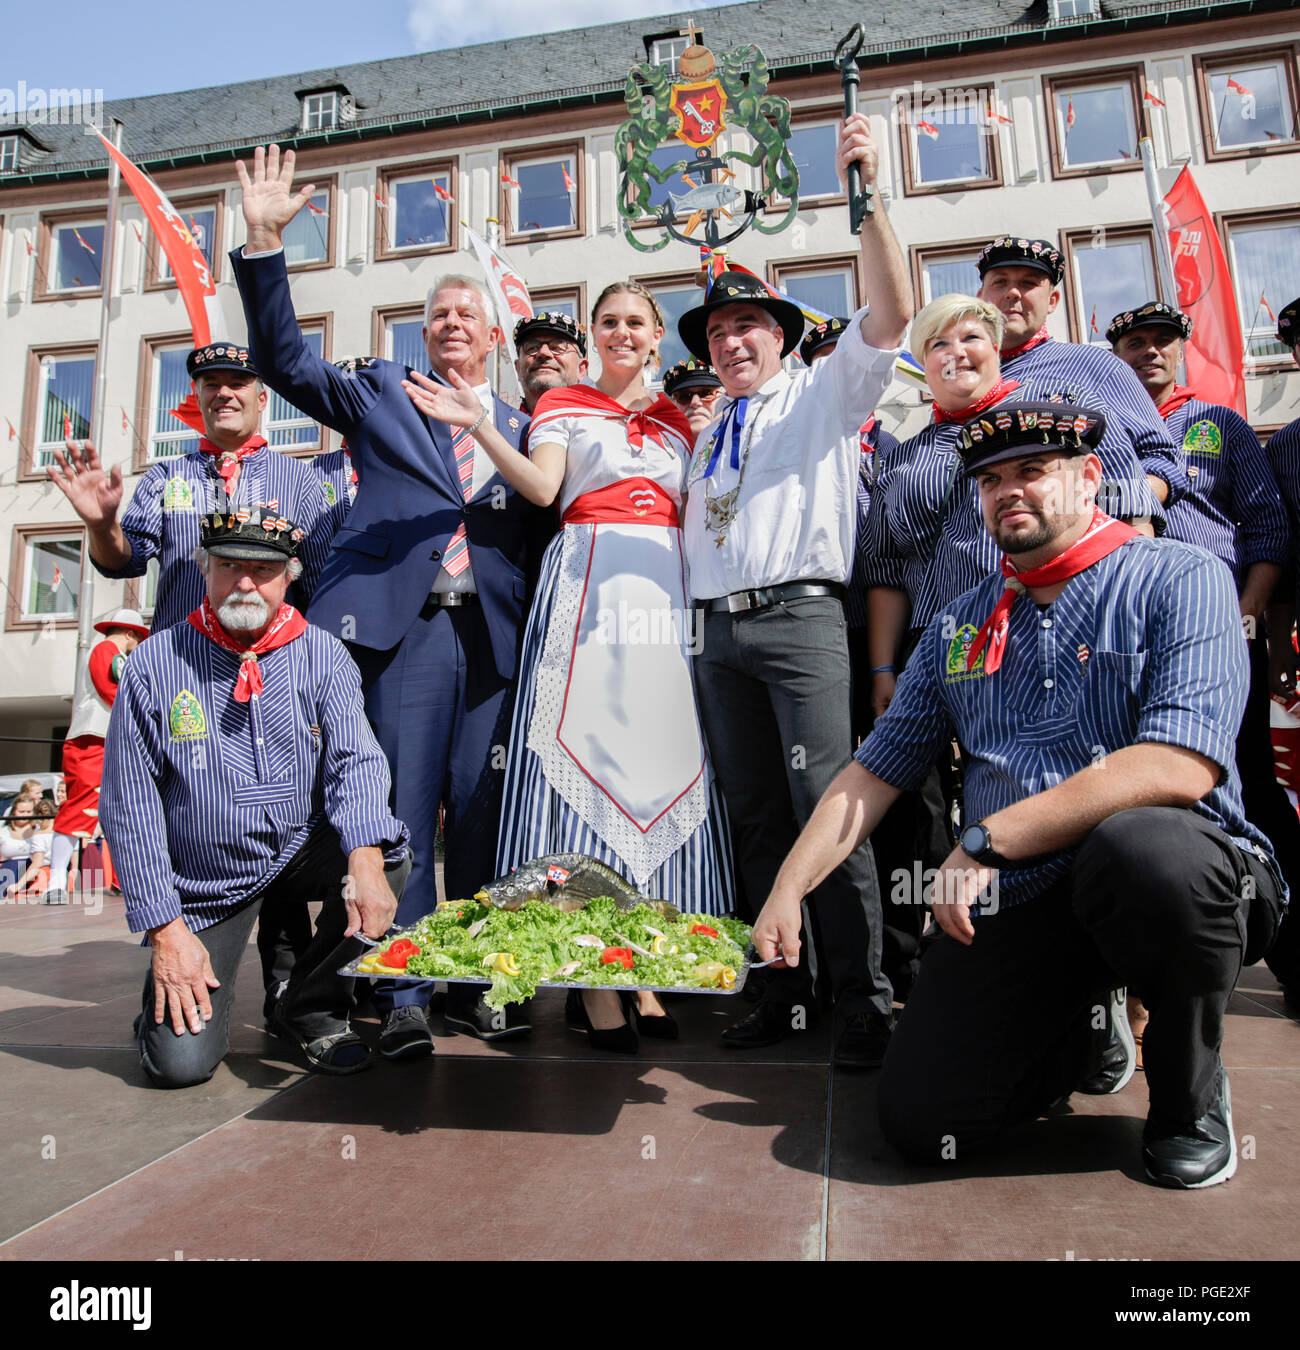 The Bojemääschter vun de Fischerwaad (mayor of the fishermen's lea), Markus Trapp( middle, right), his bride Beatrice Duda (middle, middle) and the Lord Mayor of Worms Michael Kissel (middle, left) pose for the cameras surrounded by the delegation from the Fischerwaad (fishermen's lea) area, where the fishermen used to live in the past. The largest wine and funfair along the Rhine, the Backfischfest started in Worms with the traditional handing over of power from the Lord Mayor to the mayor of the fishermen's lea. The ceremony was framed by dances and music. (Photo by Michael Debets/Pacific Pr Stock Photo